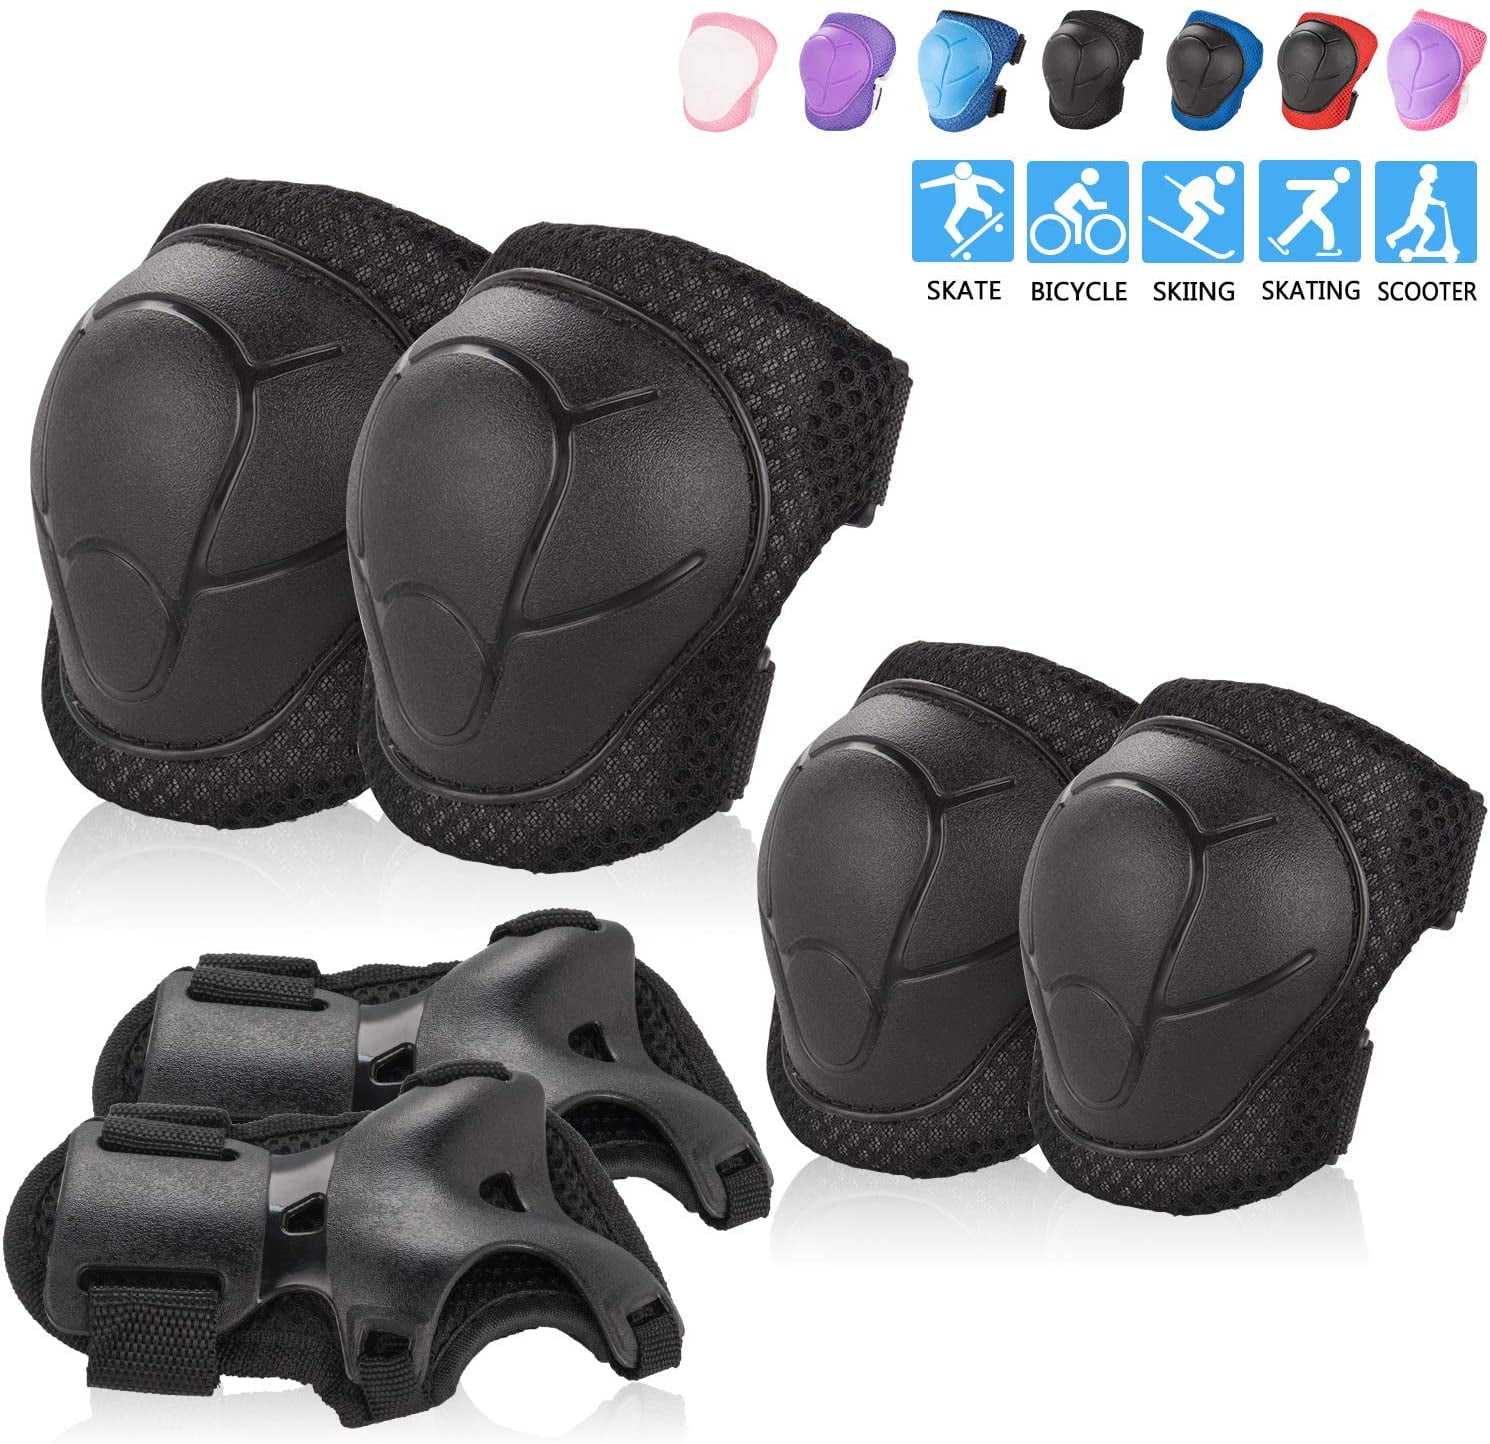 Knee Pads for Kids Kneepads and Elbow Pads Protective Toddler Gear Set Kids Pads 